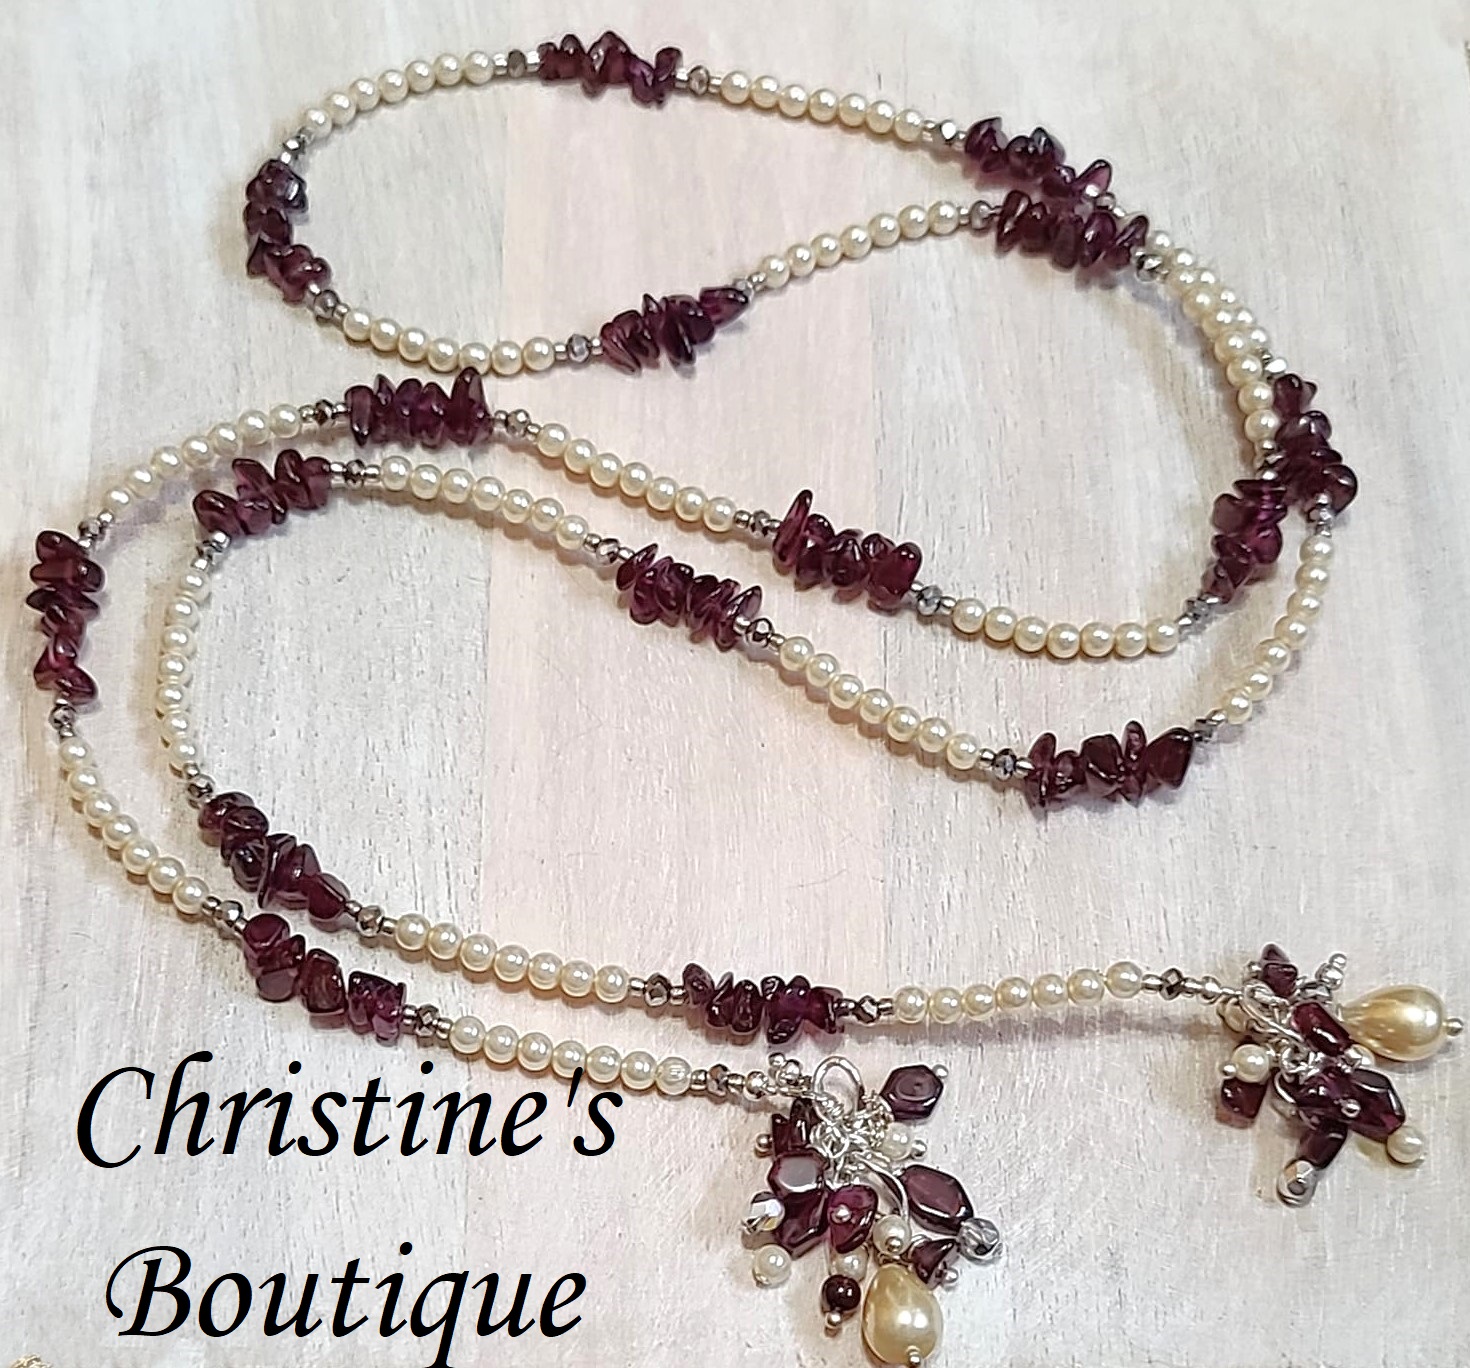 Garnet lariat necklace, garnets and pearls with fringe handcraft - Click Image to Close